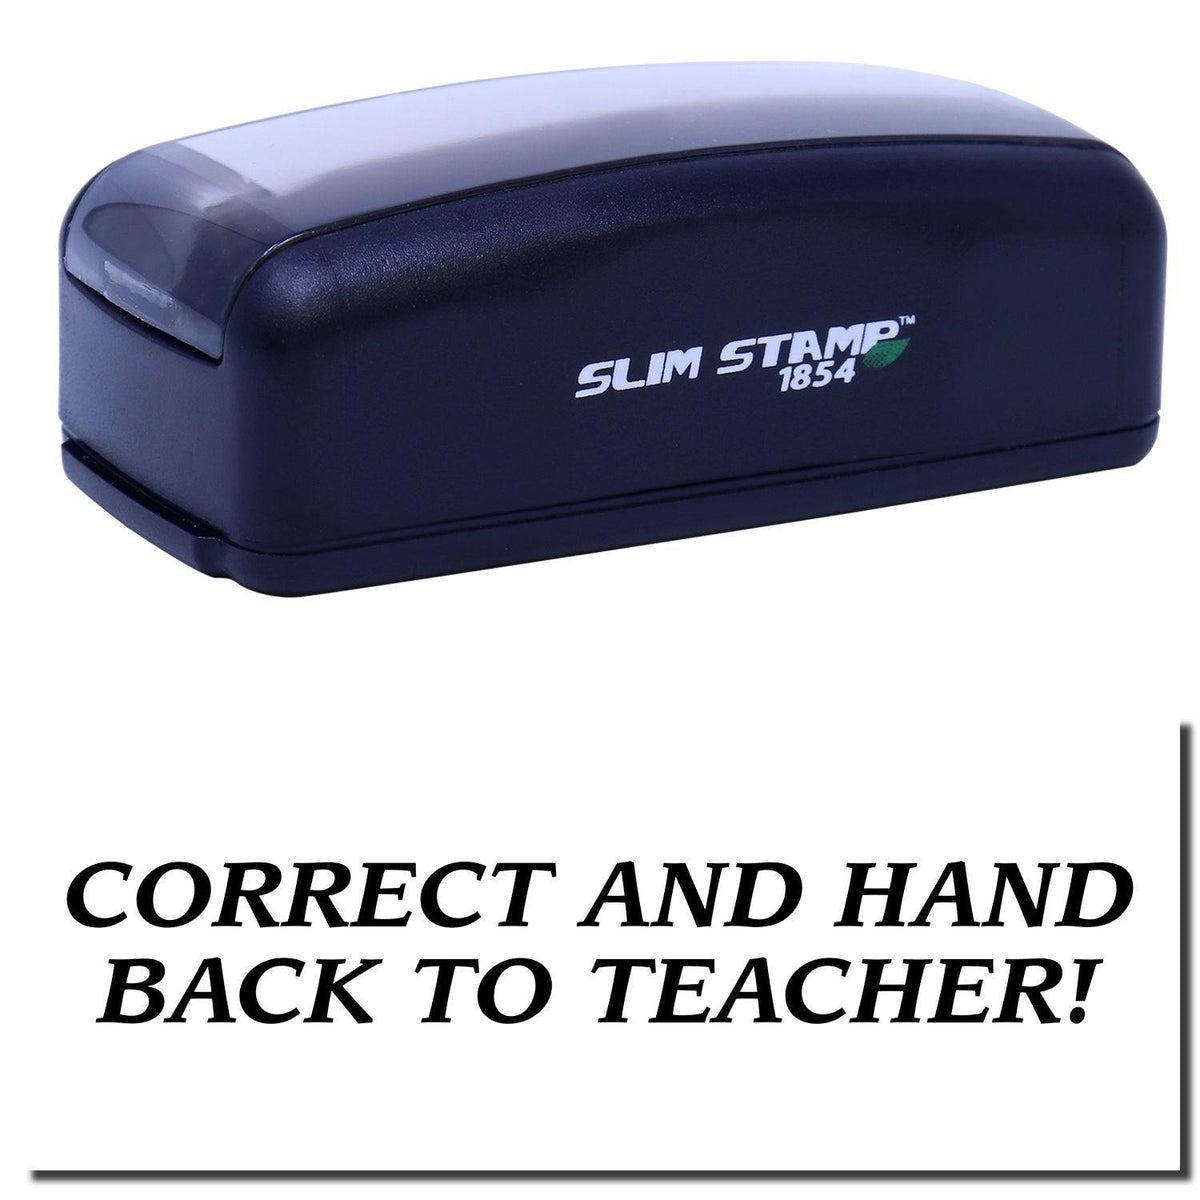 A stock office pre-inked stamp with a stamped image showing how the text &quot;CORRECT AND HAND BACK TO TEACHER!&quot; in a large font is displayed after stamping.